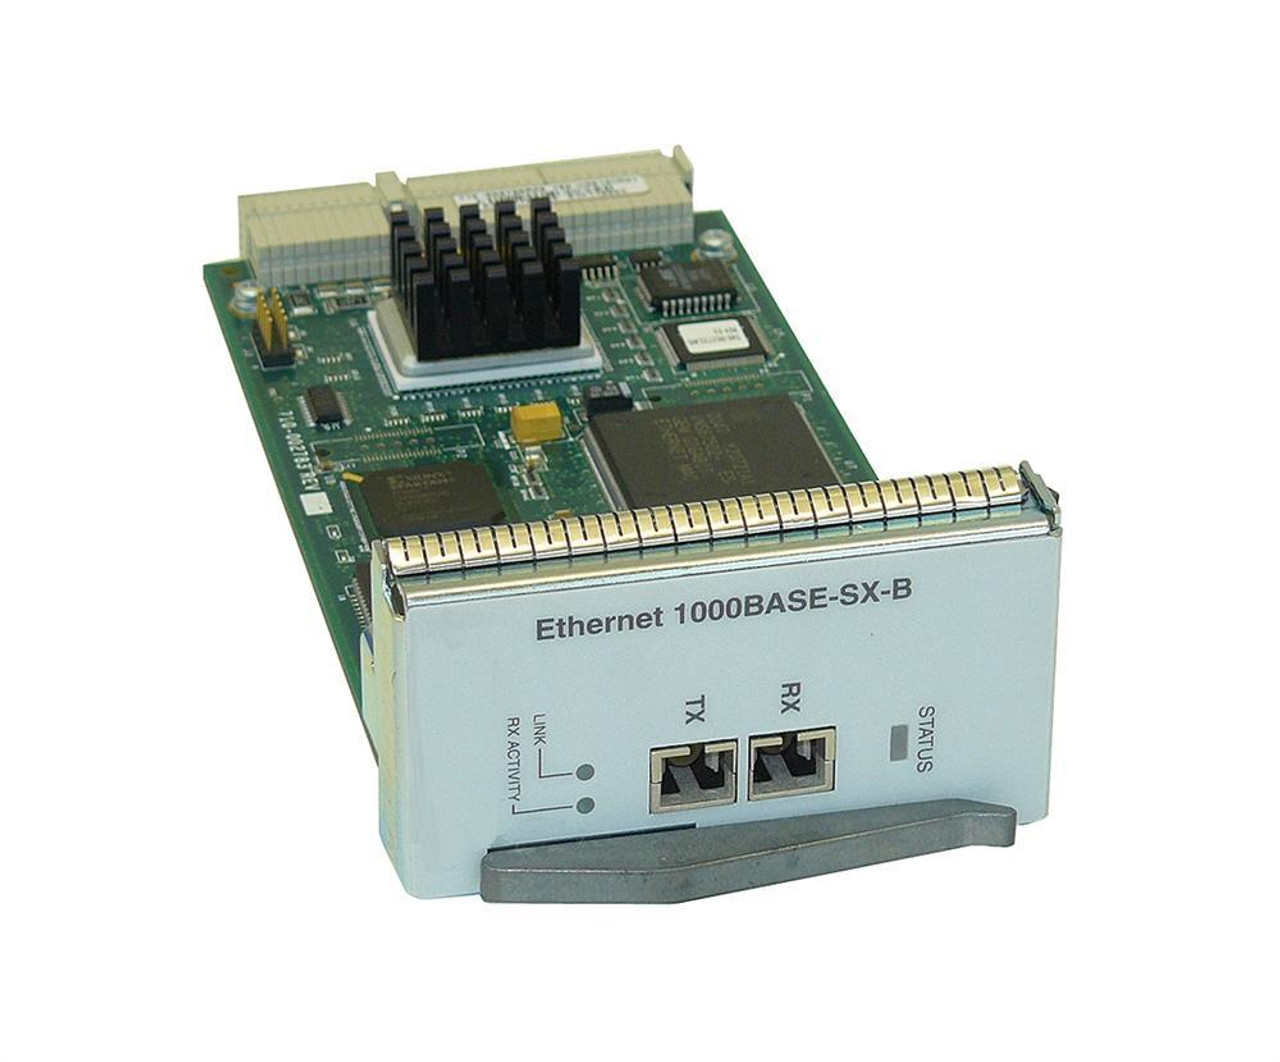 711-031390 Juniper Enhanced MX Switch Control Board for MX240, MX480 and MX960 Universal Edge Routers (Refurbished)